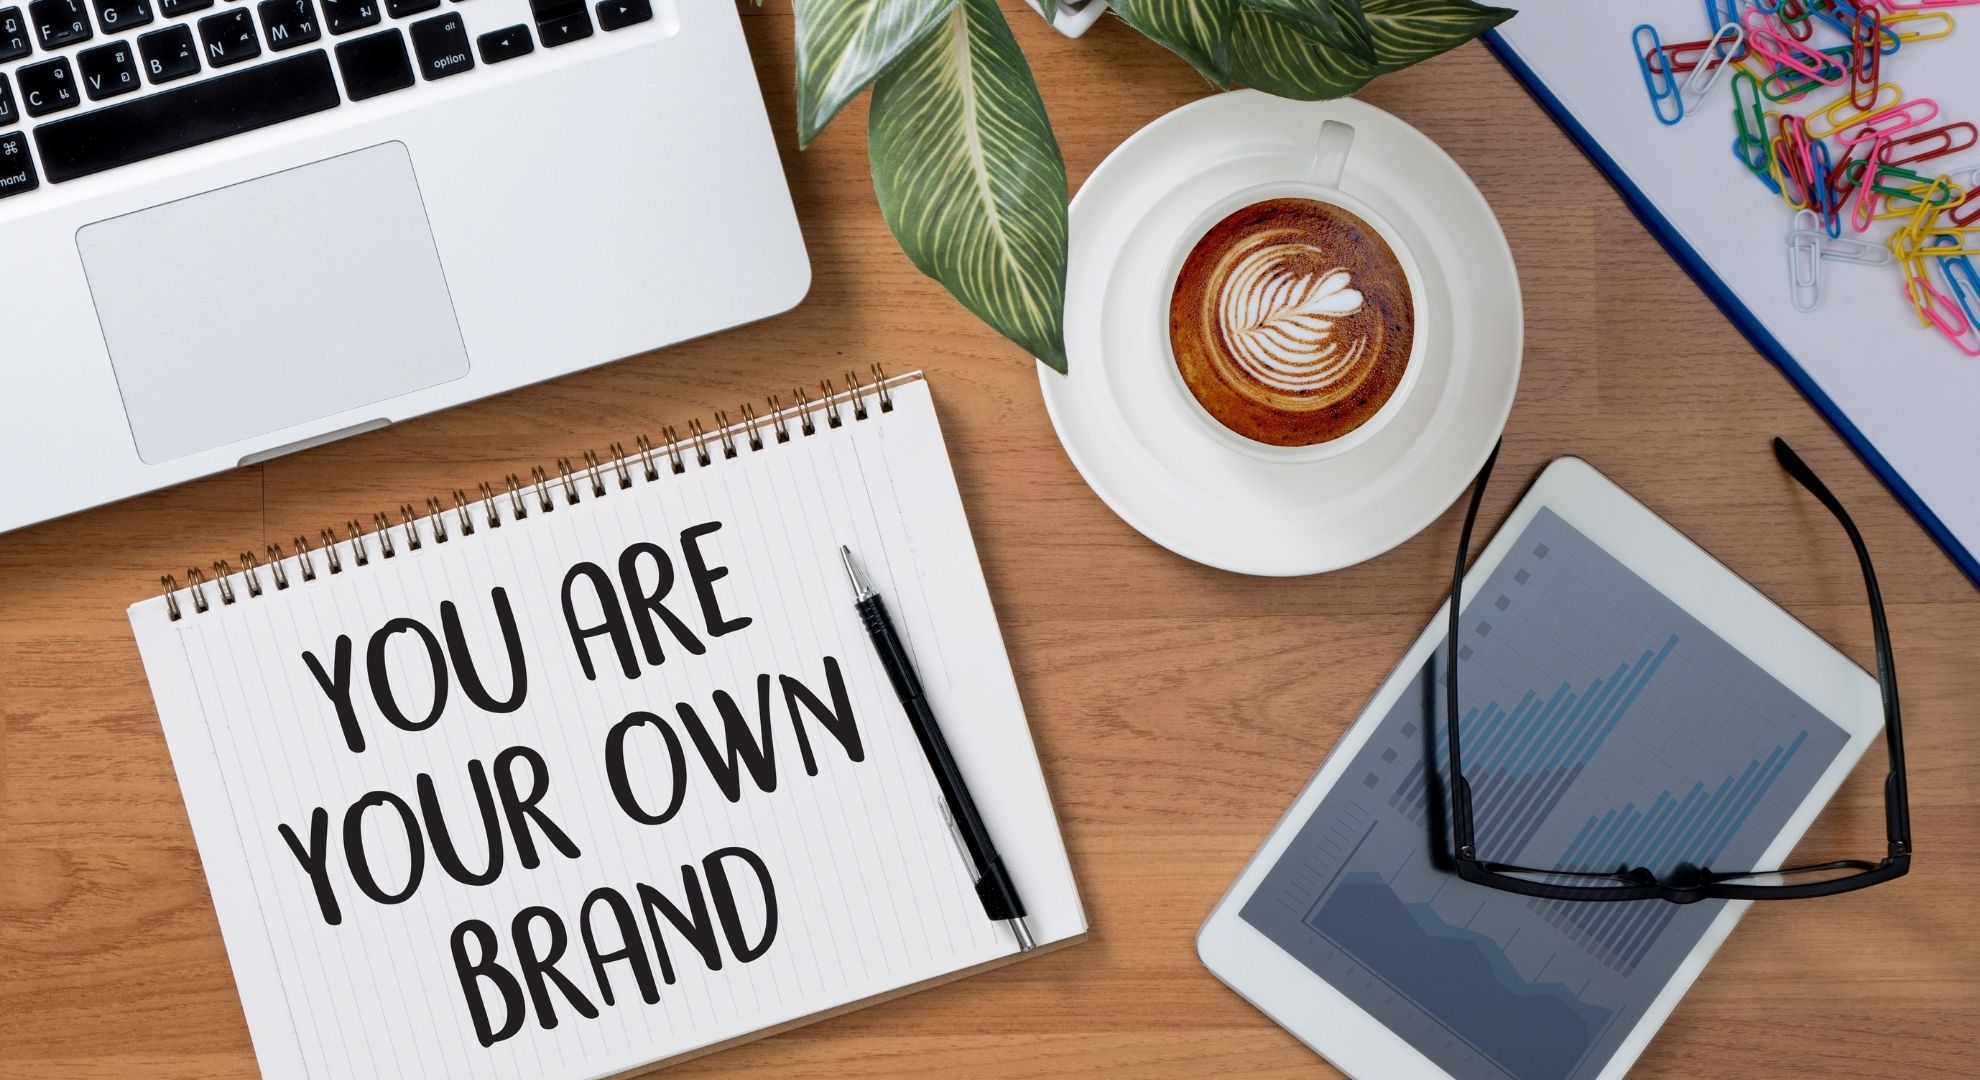 YOU ARE YOUR OWN BRAND